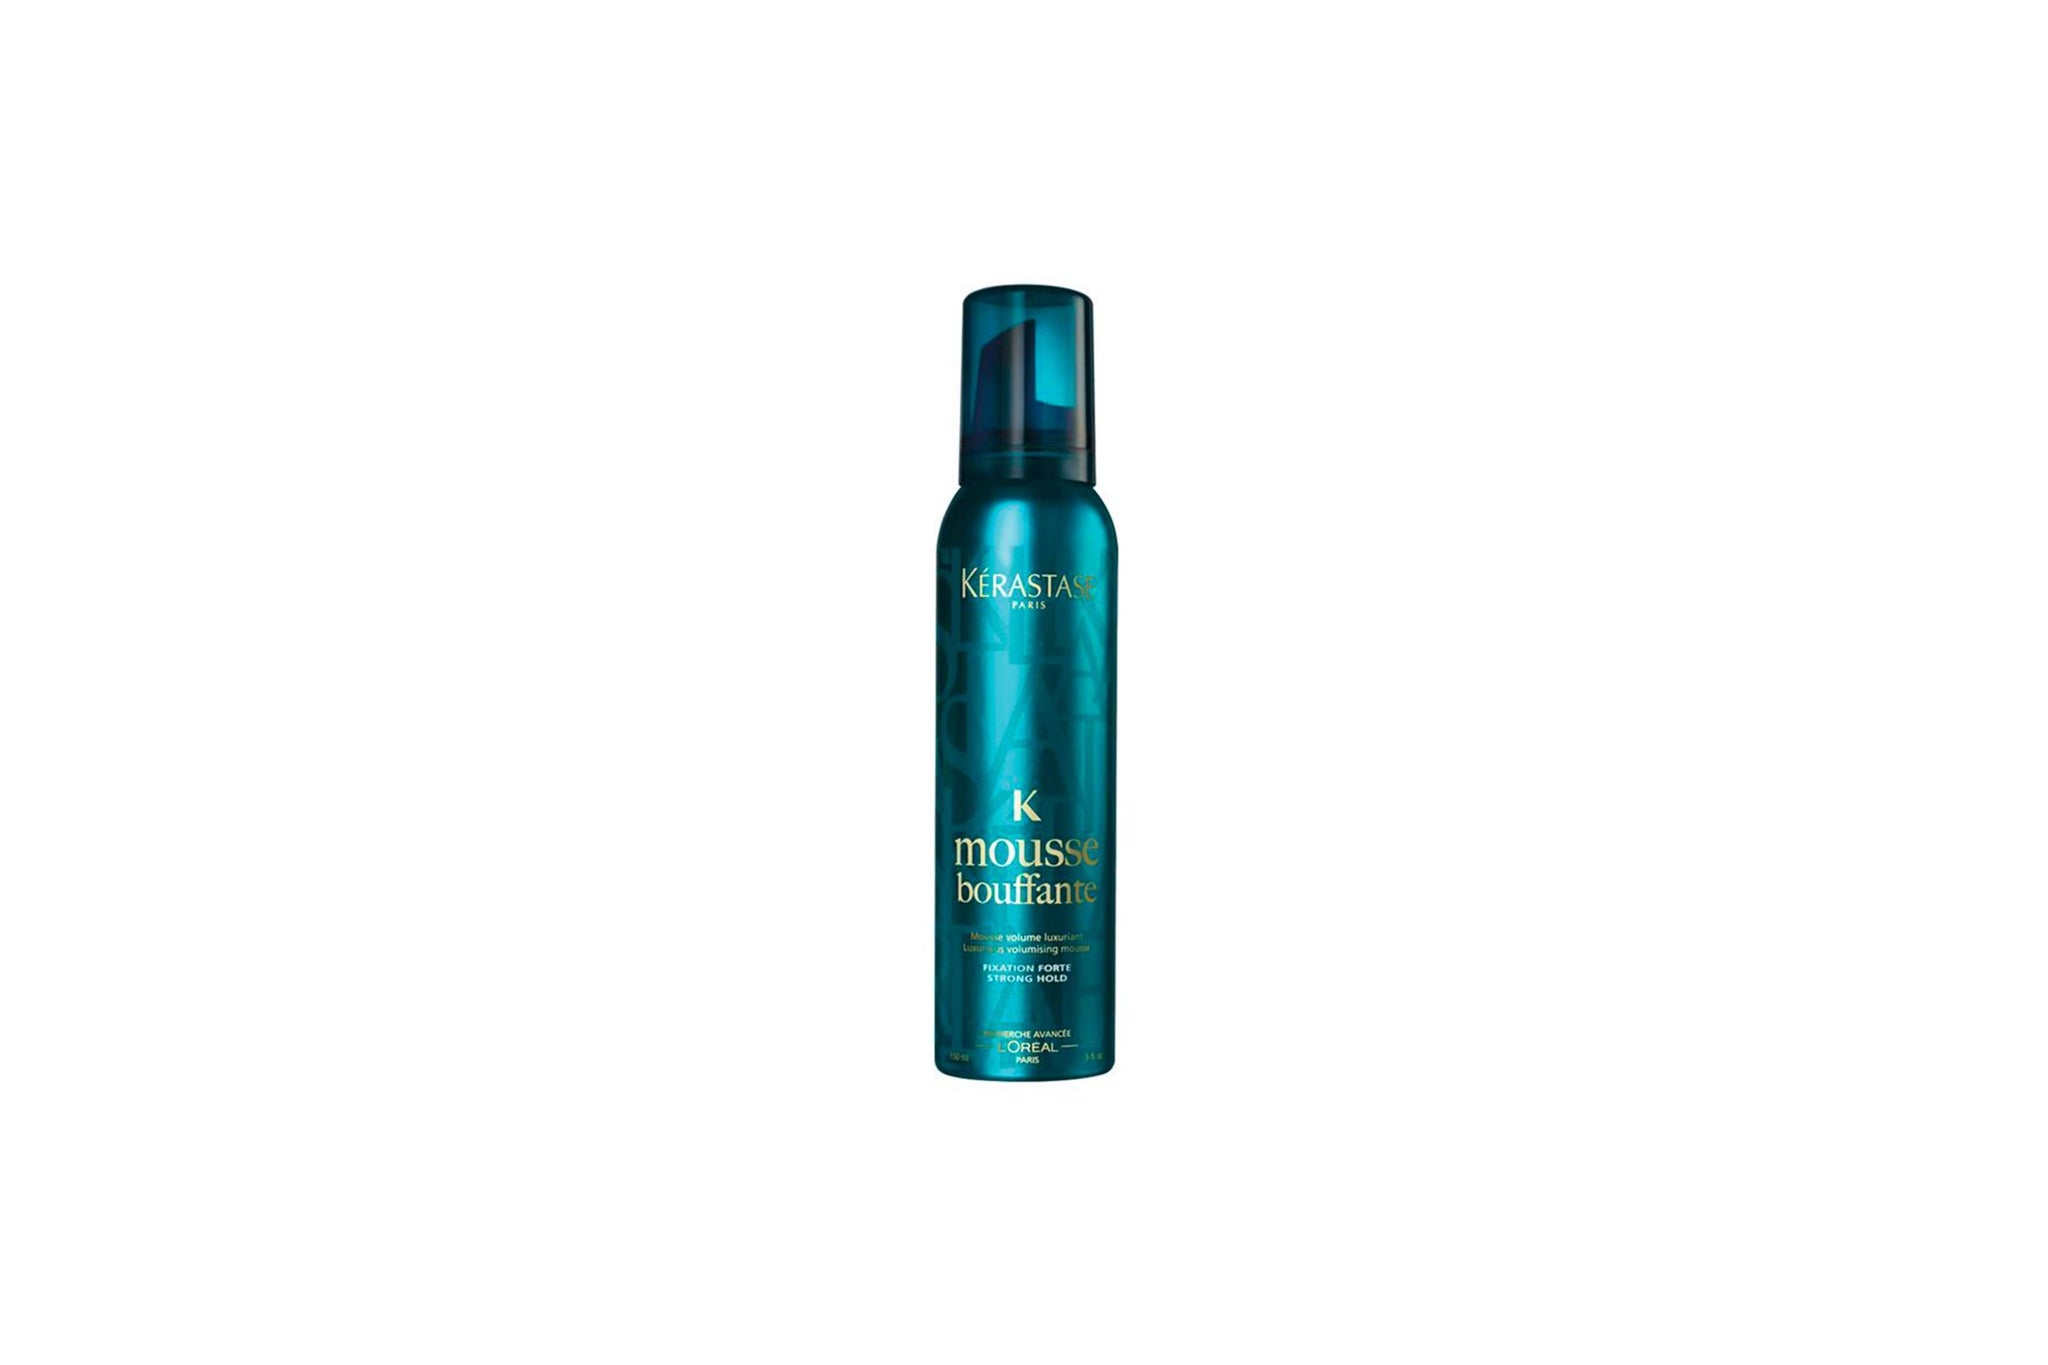 KERASTASE - COIFFAGE COUTURE STYLING MOUSSE BOUFFANTE